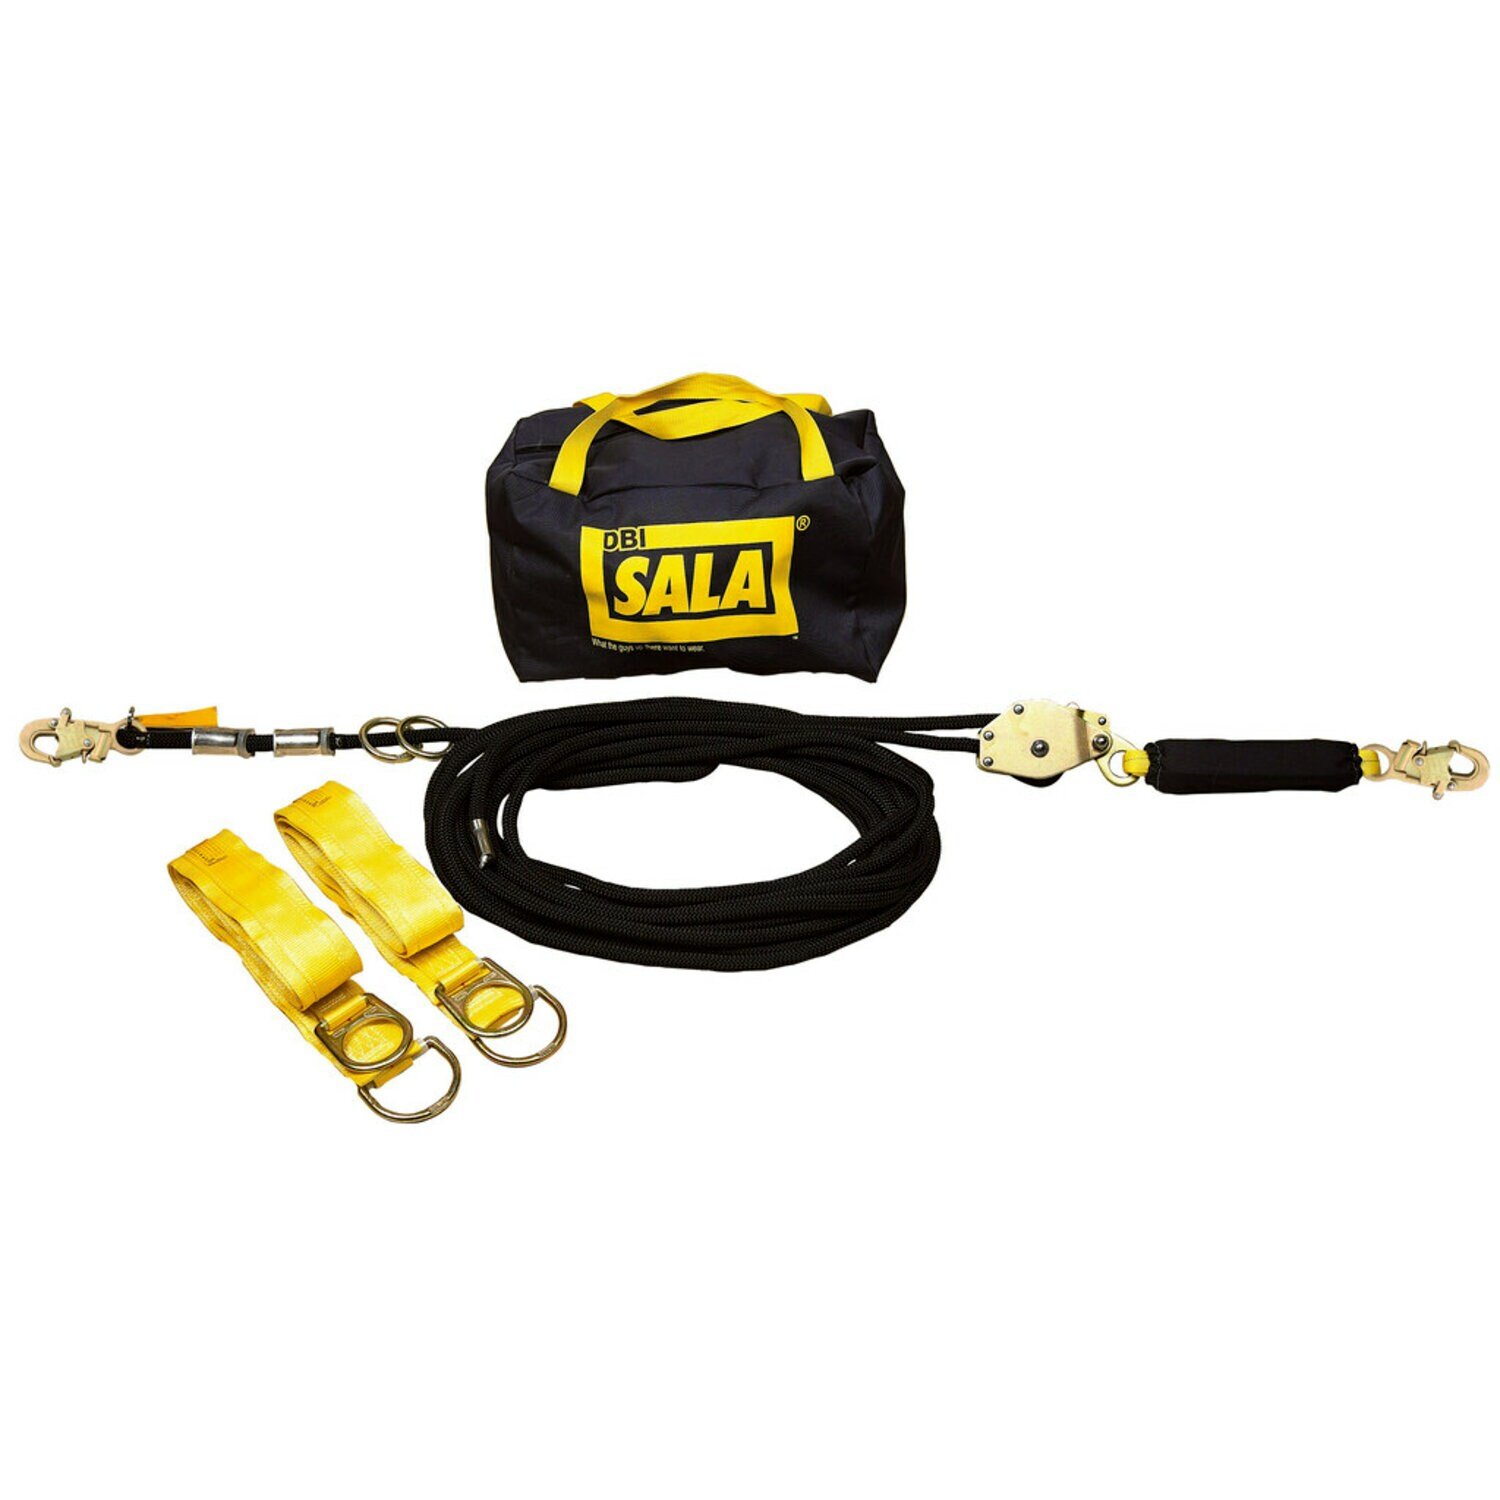 7012820310 - 3M DBI-SALA Temporary Horizontal Lifeline System with Anchors 7600708, 11/16 in Nylon Kernmantle Rope, 90 ft